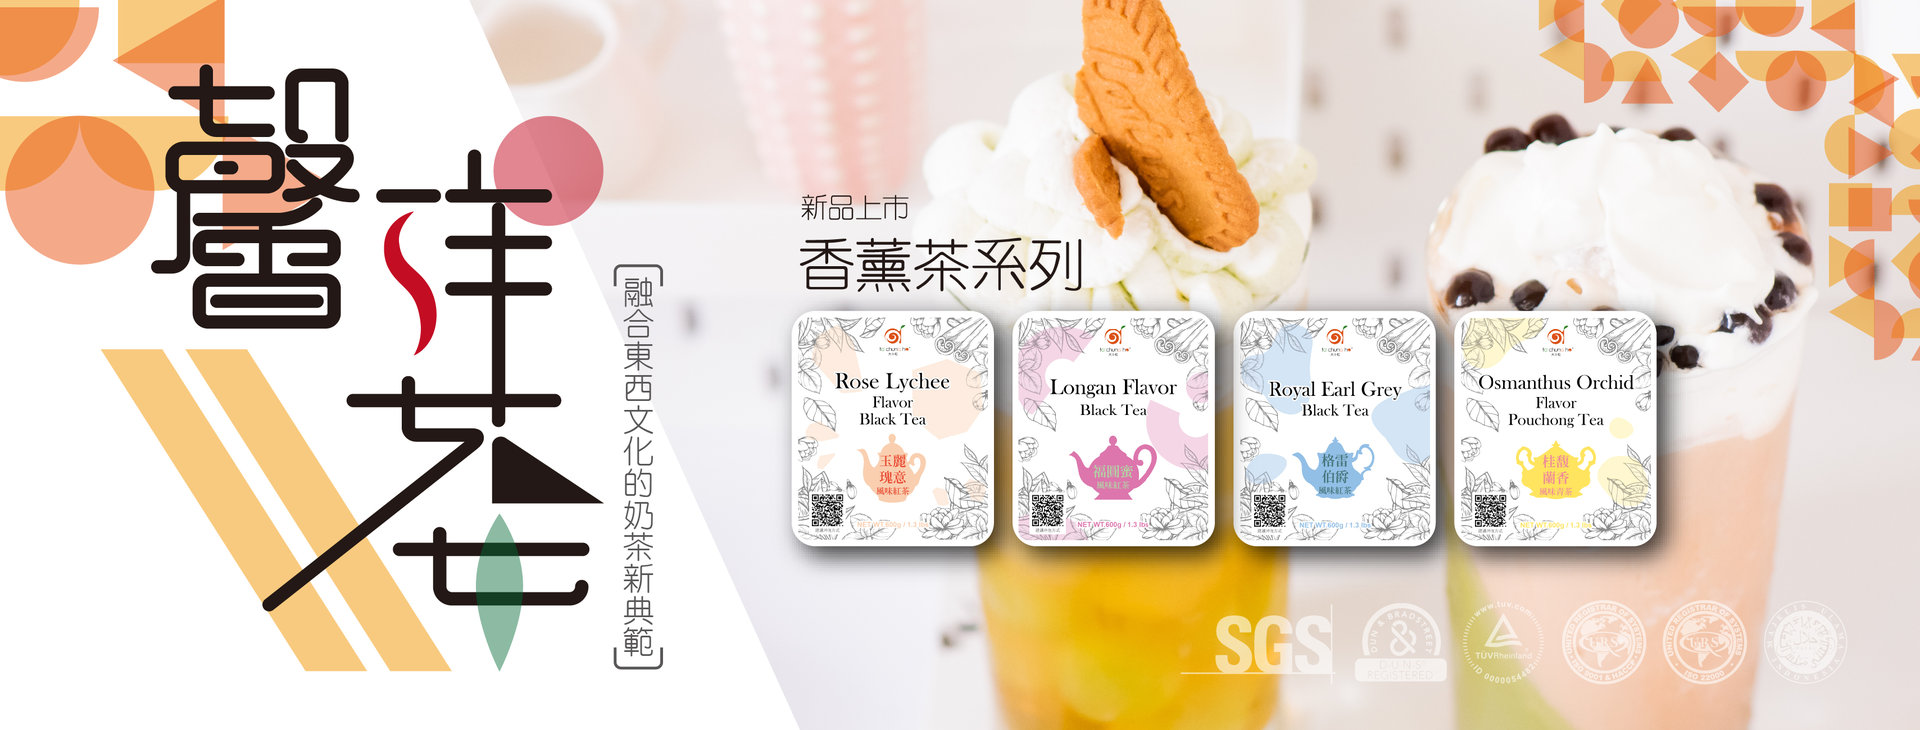 【2021 New Product】The orient Flavoured milk Tea